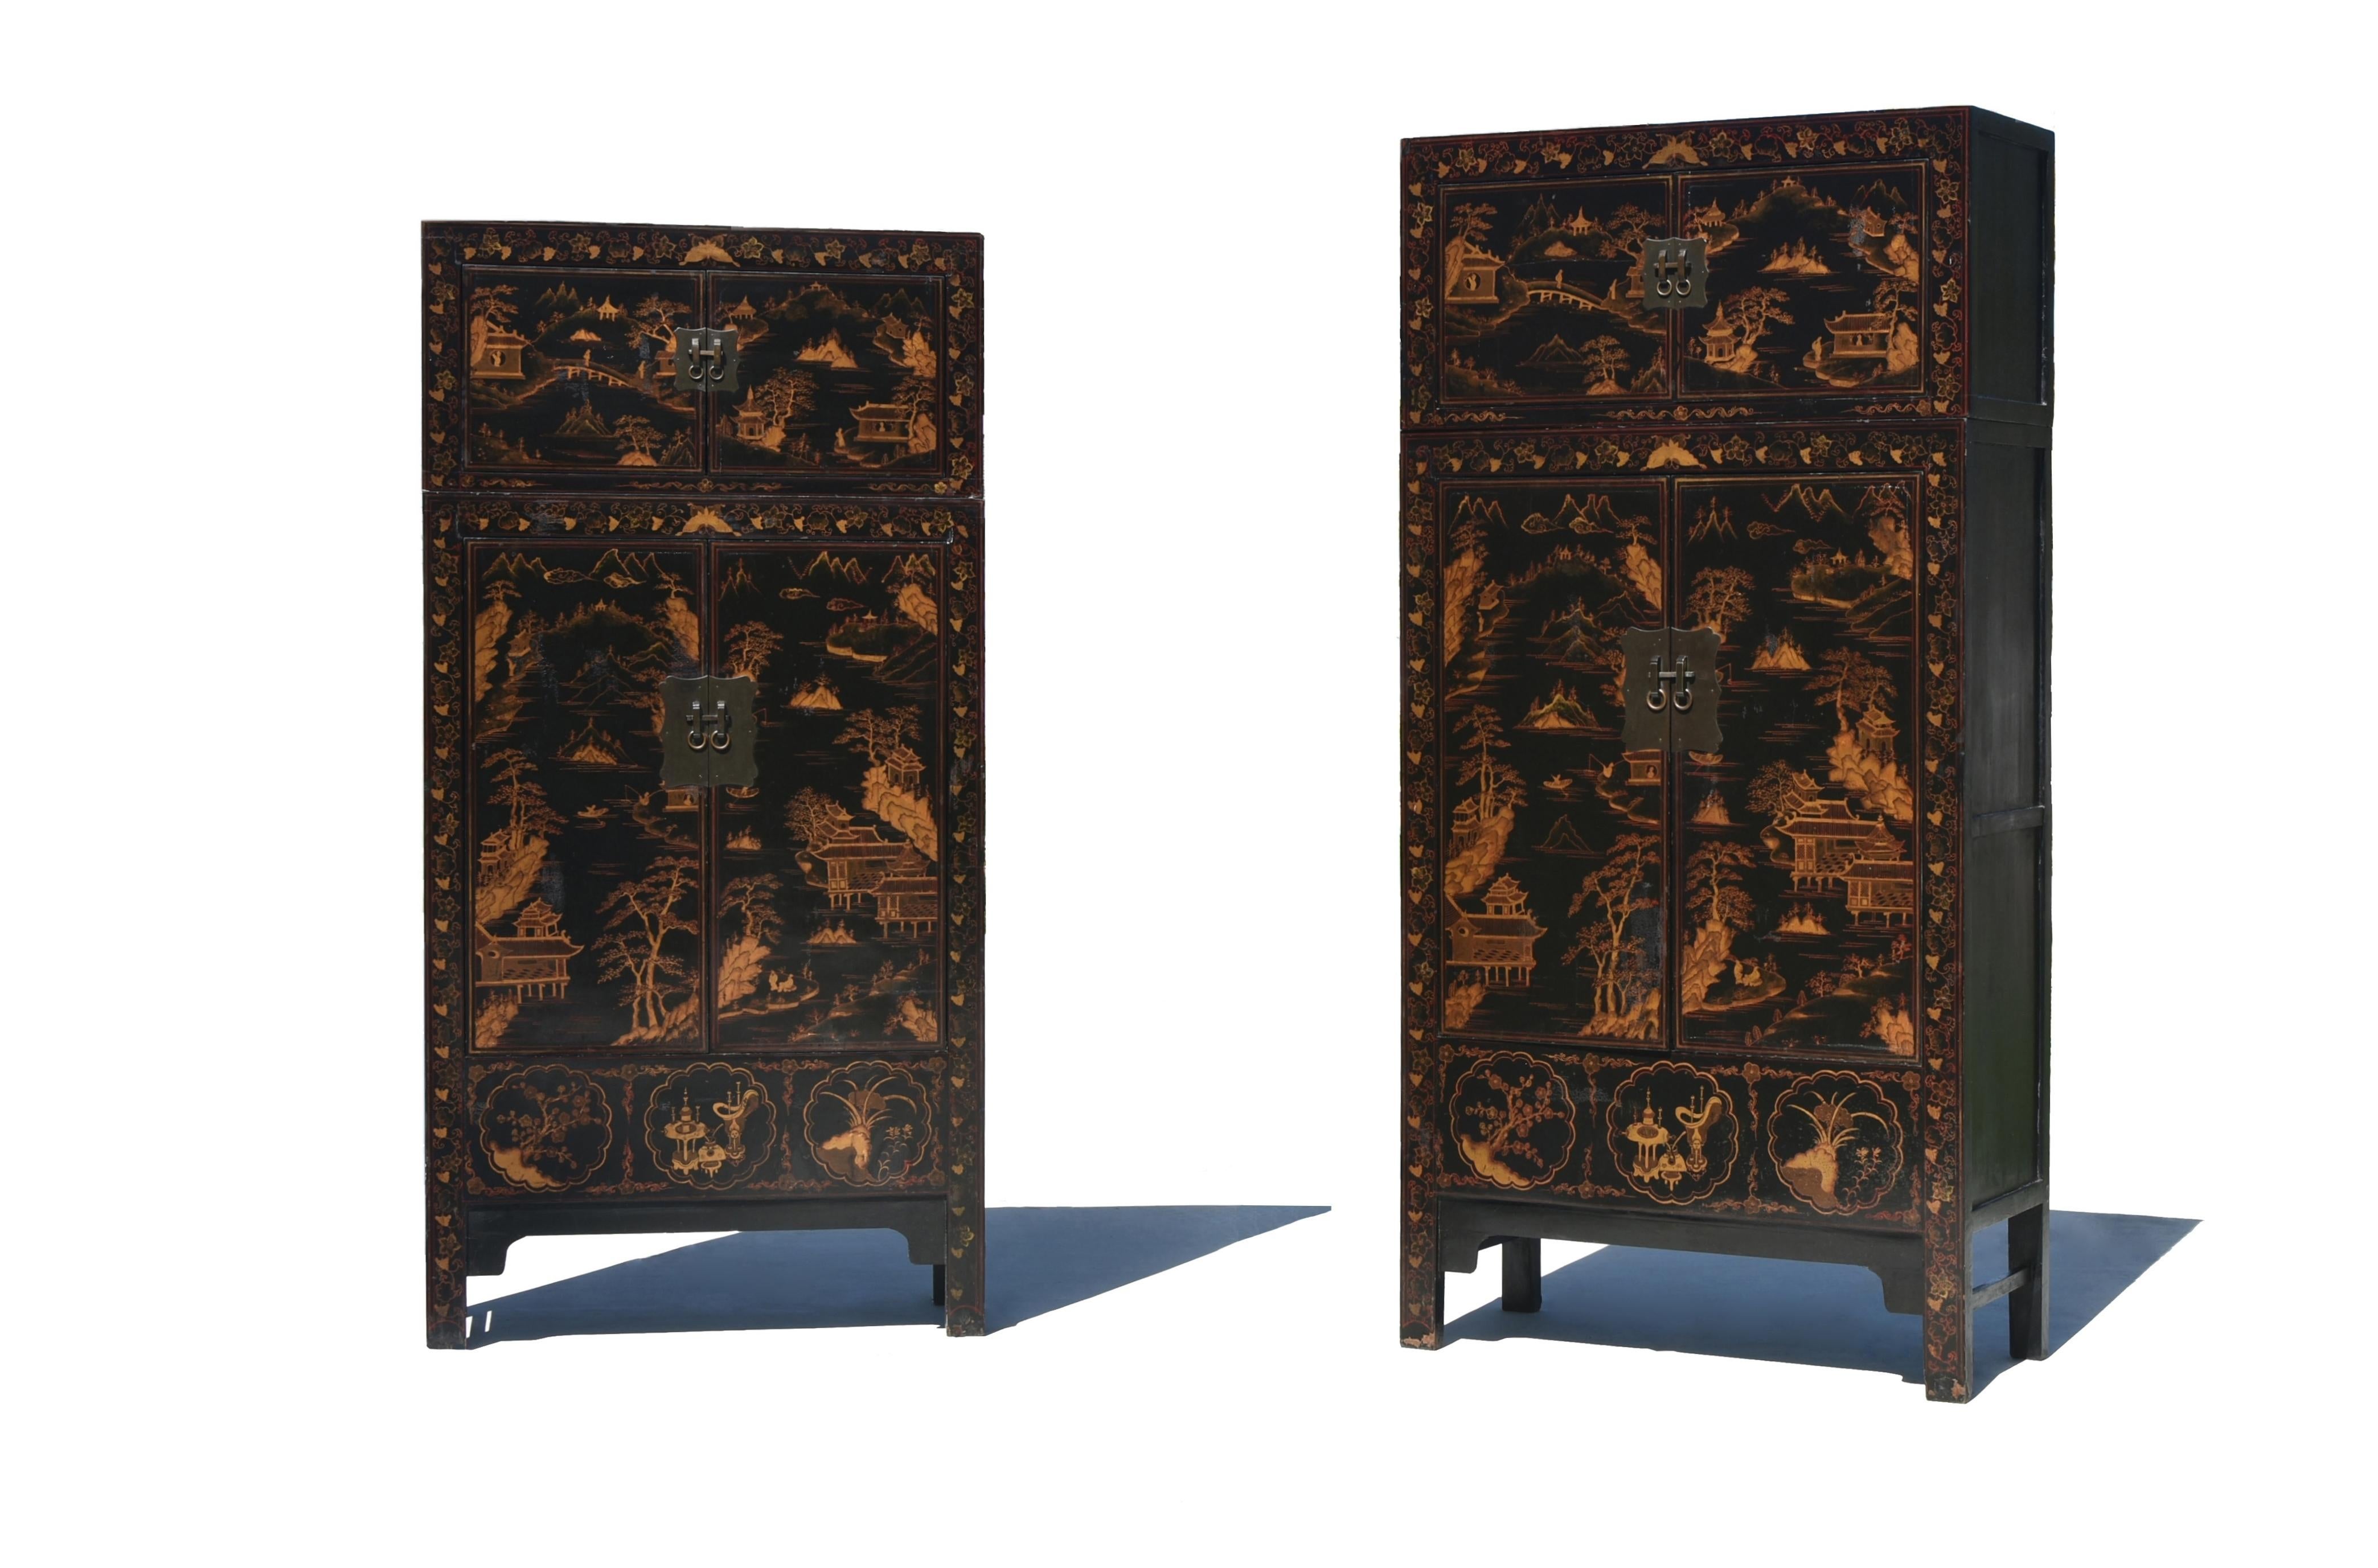 A rare offering. The pair of extraordinary black lacquered Chinese Chinoiserie cabinets with original top chests measuring at 91